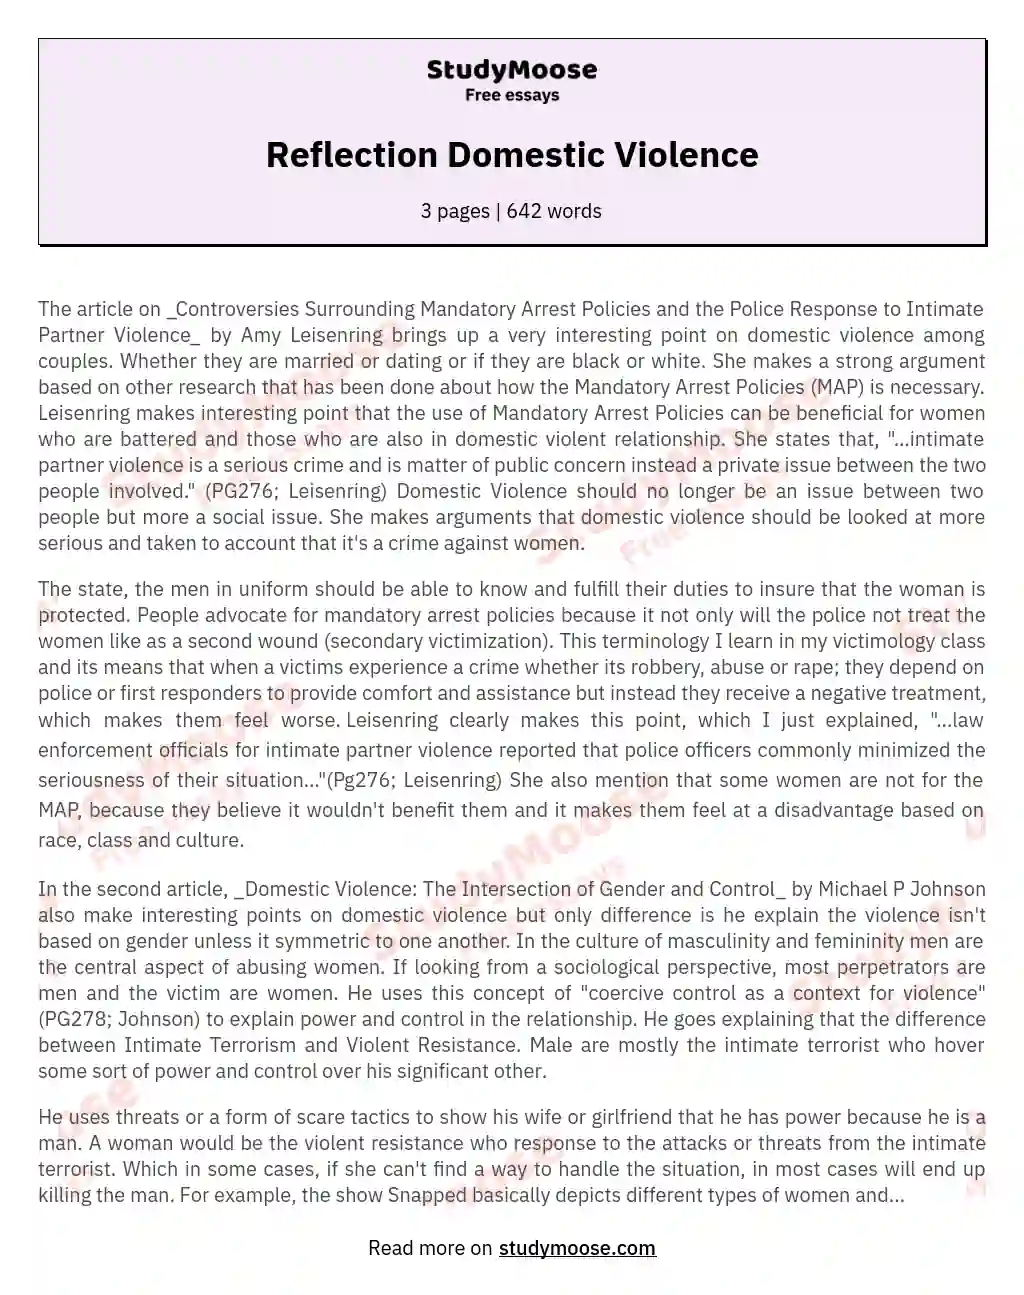 introduction to domestic violence essay